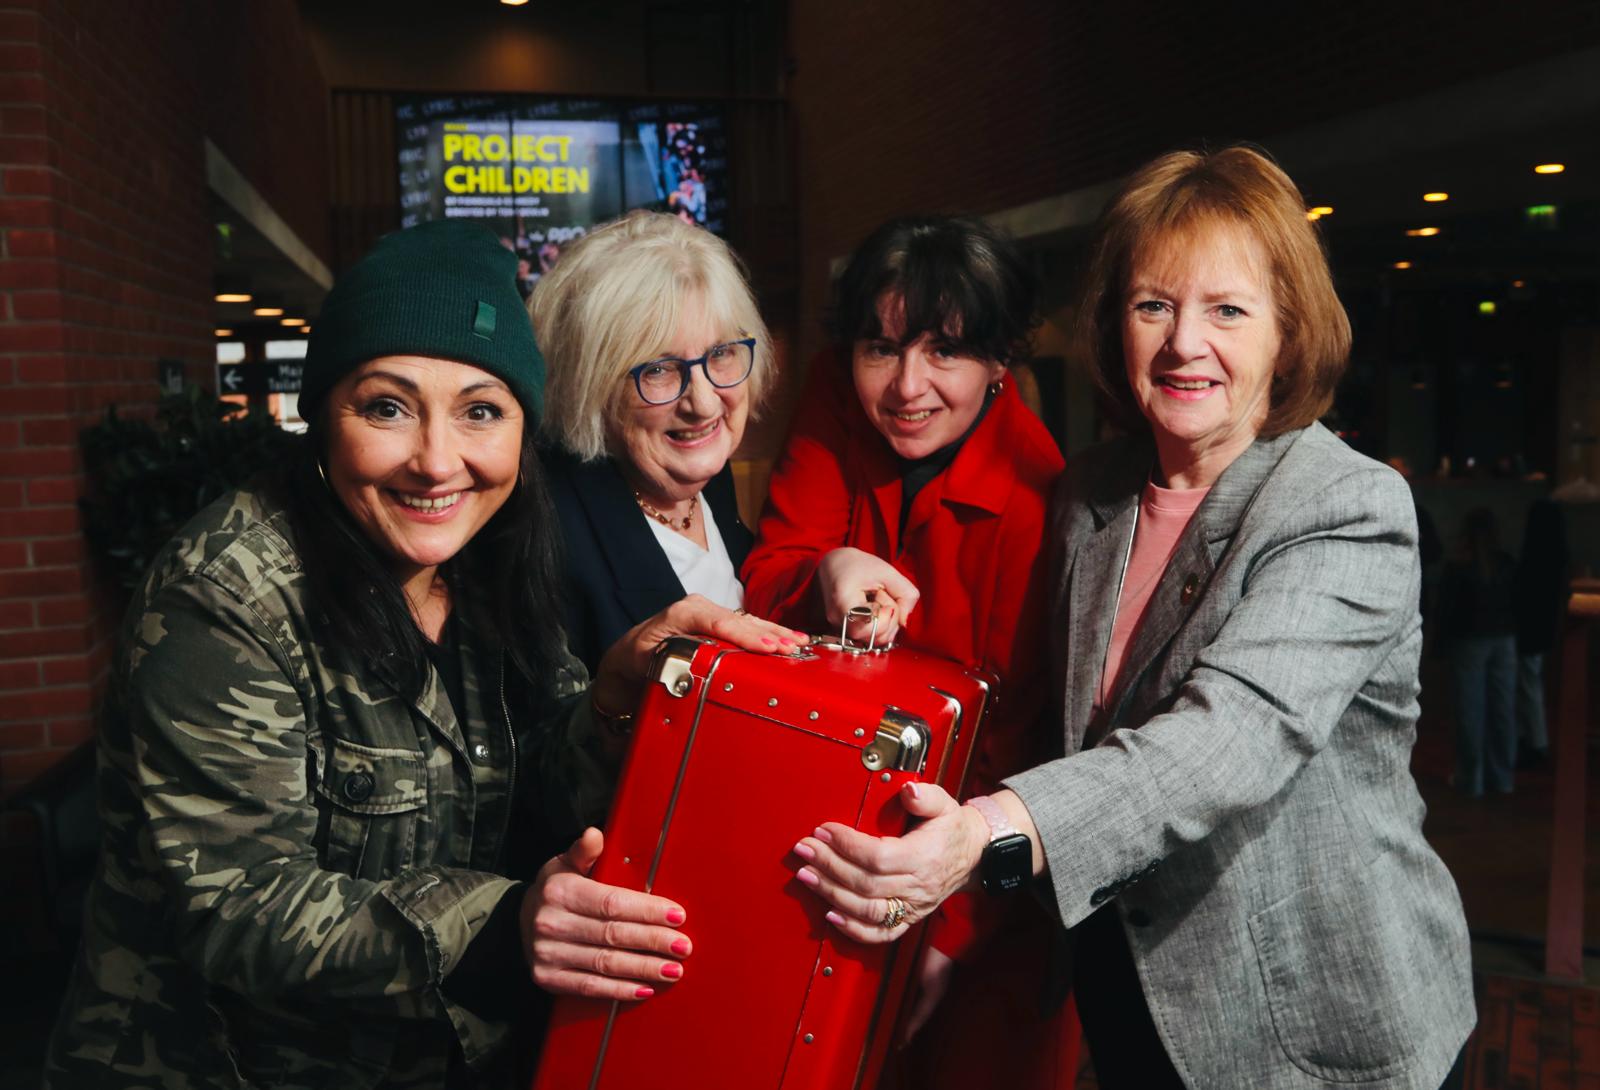 LAUNCH: Mary Moulds (actress), Monica Culbert (Project Children volunteer), Nicky Harley (actress) and Sally Brennan (Project Children volunteer)